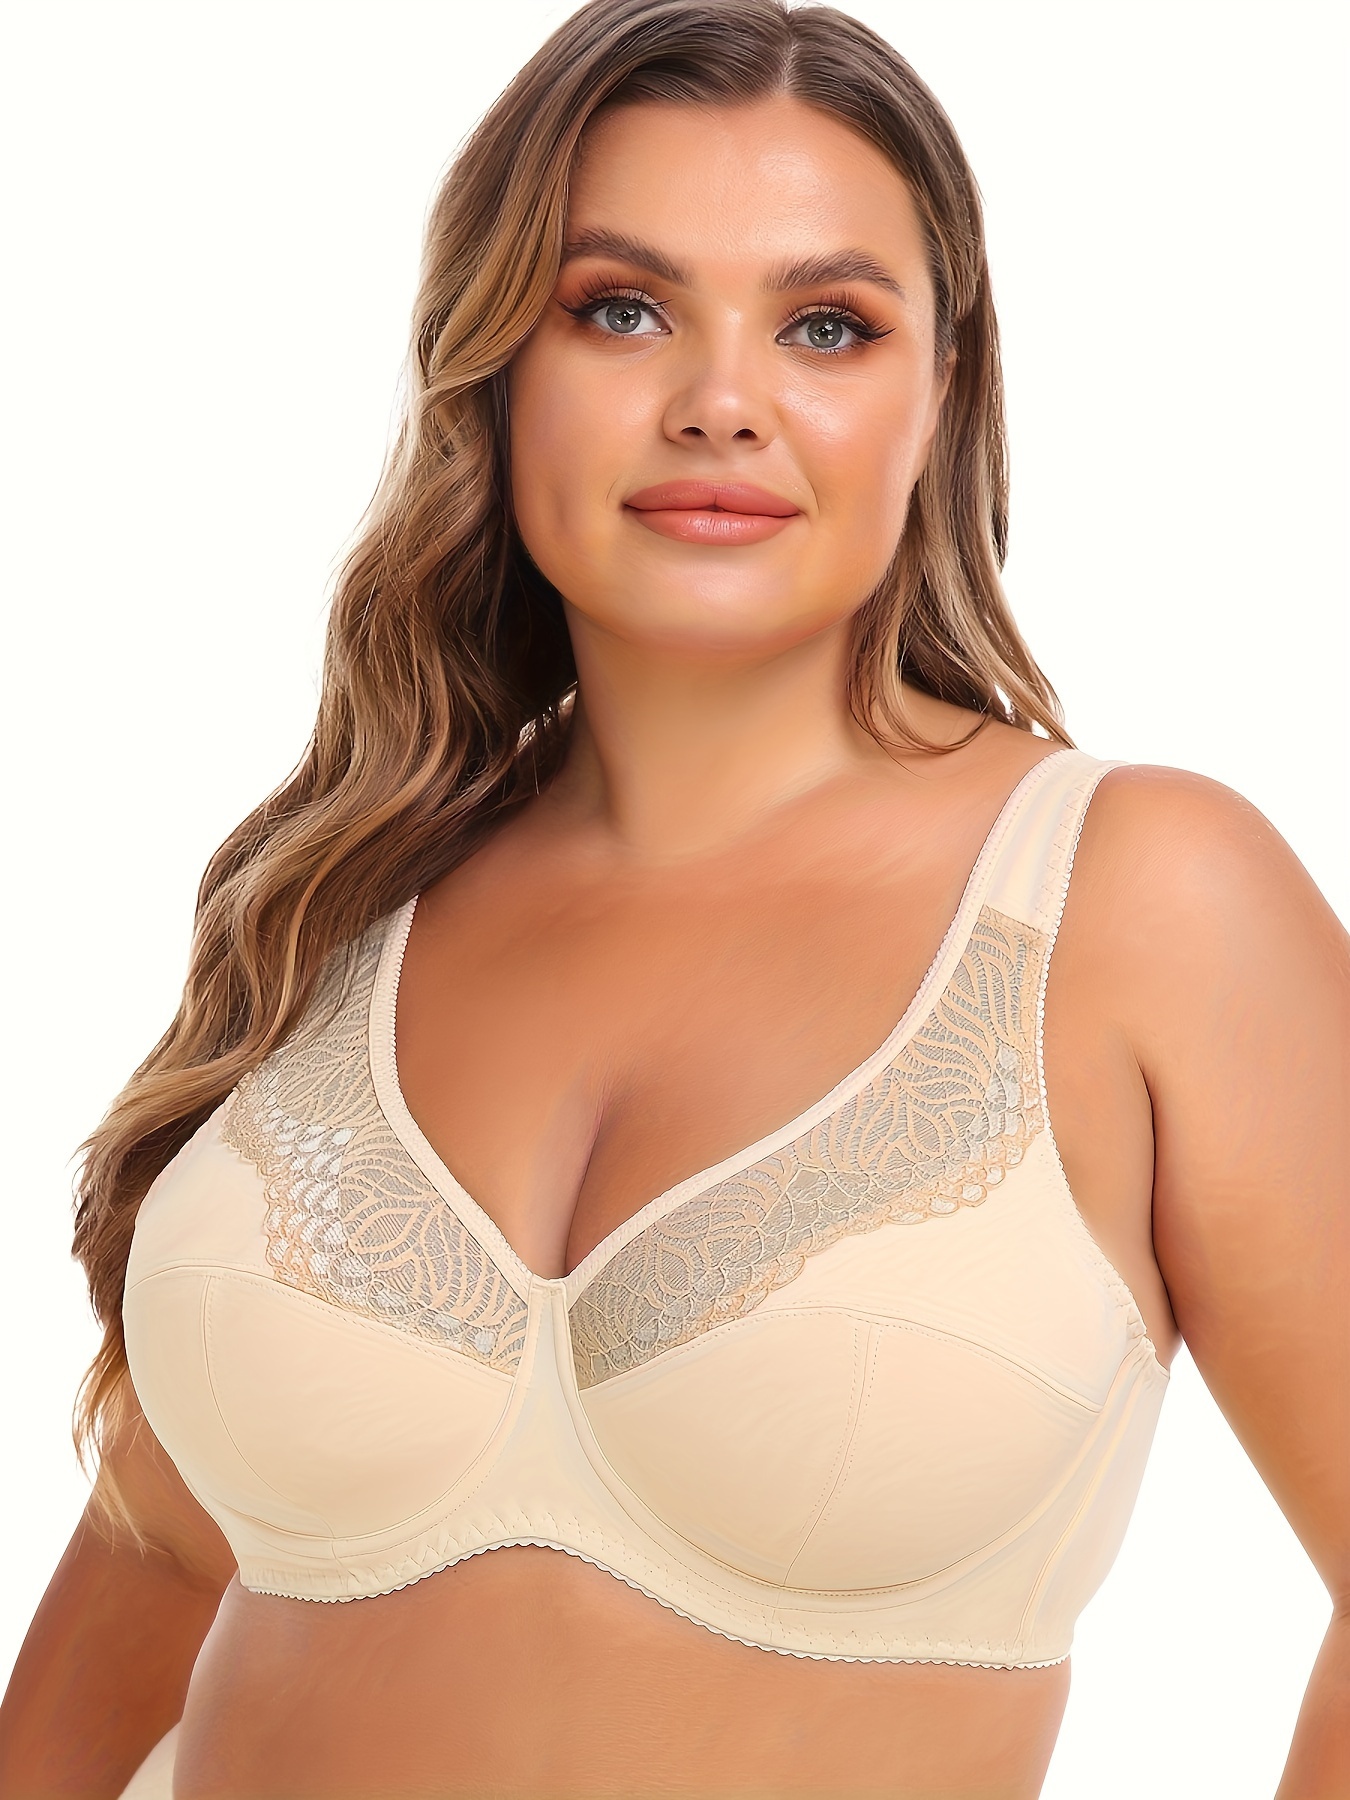  Bras for Women No Underwire Women Sexy Push Up Deep V Ultrathin  Underwire Padded Lace Brassiere Bra (White, 40B) : Sports & Outdoors